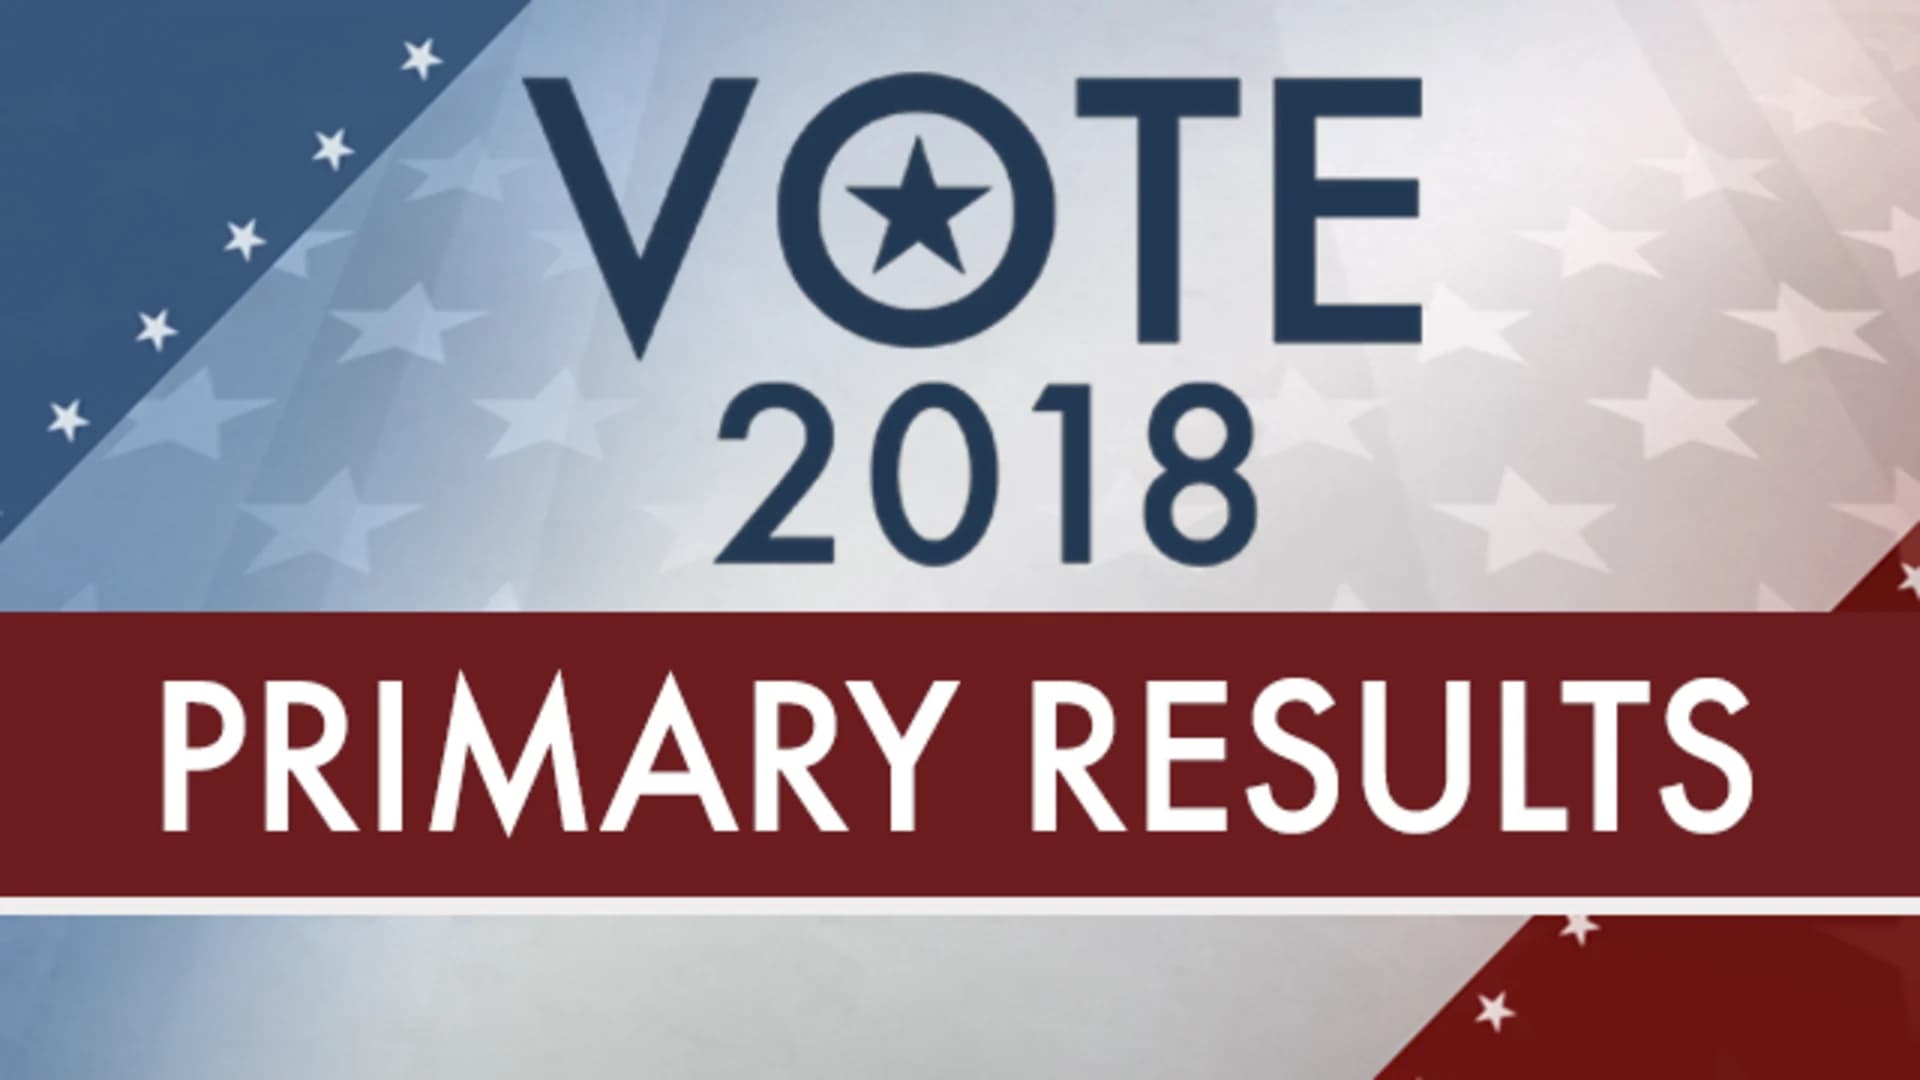 News 12 The Bronx Vote 2018: Primary Results